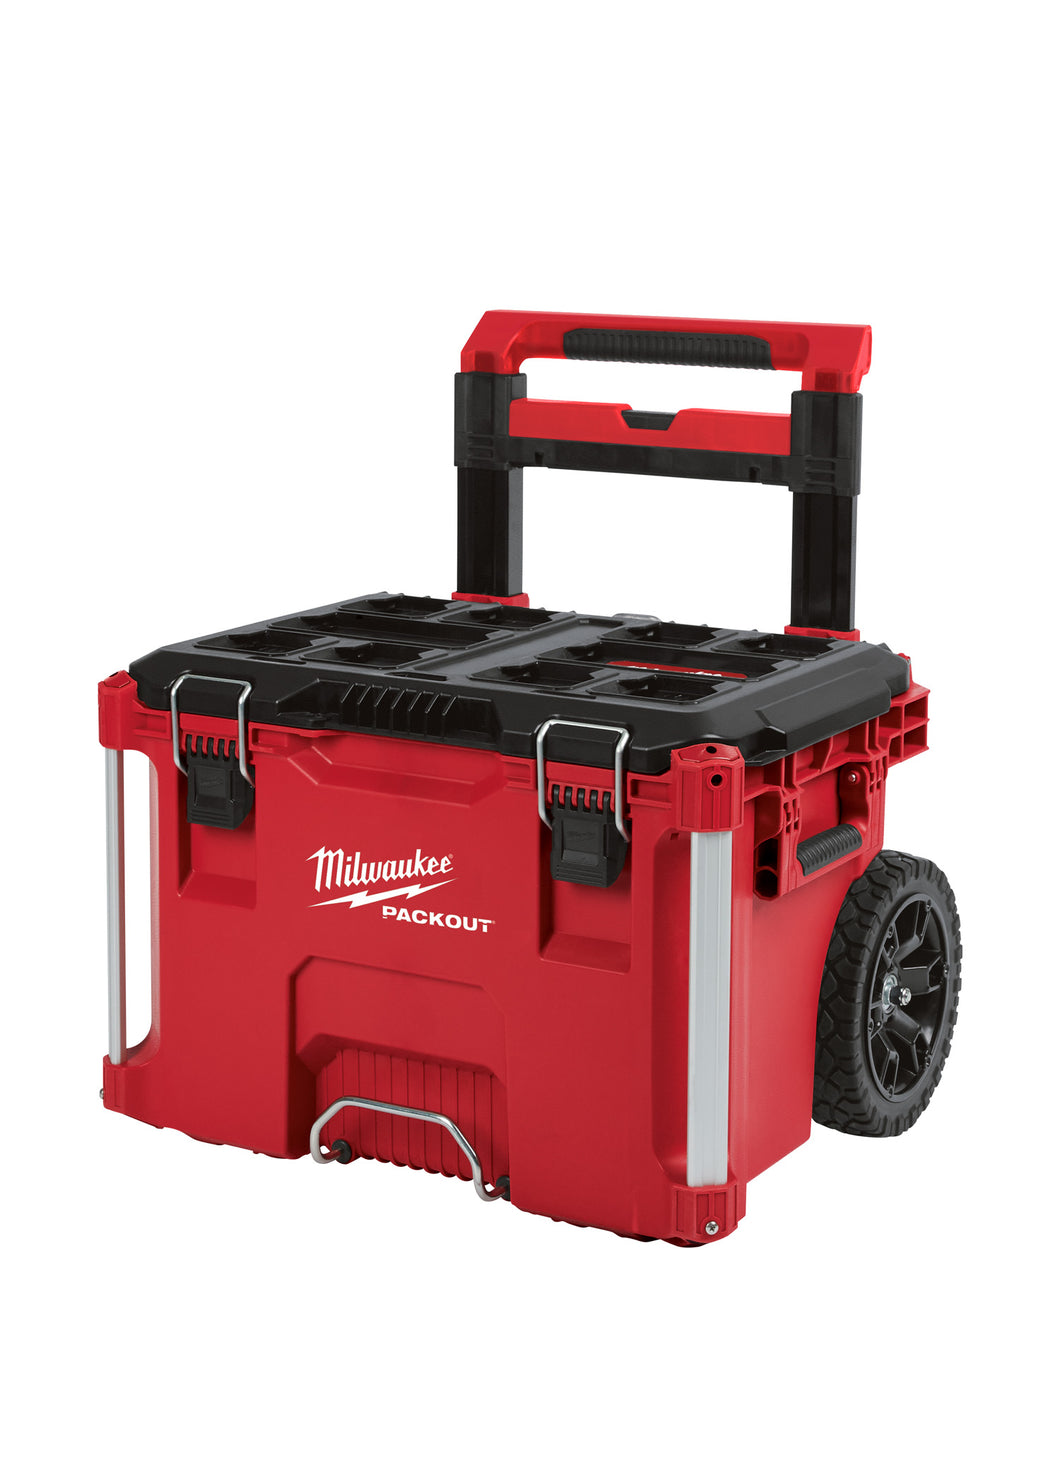 MILWAUKEE PACKOUT™ Rolling Tool Box